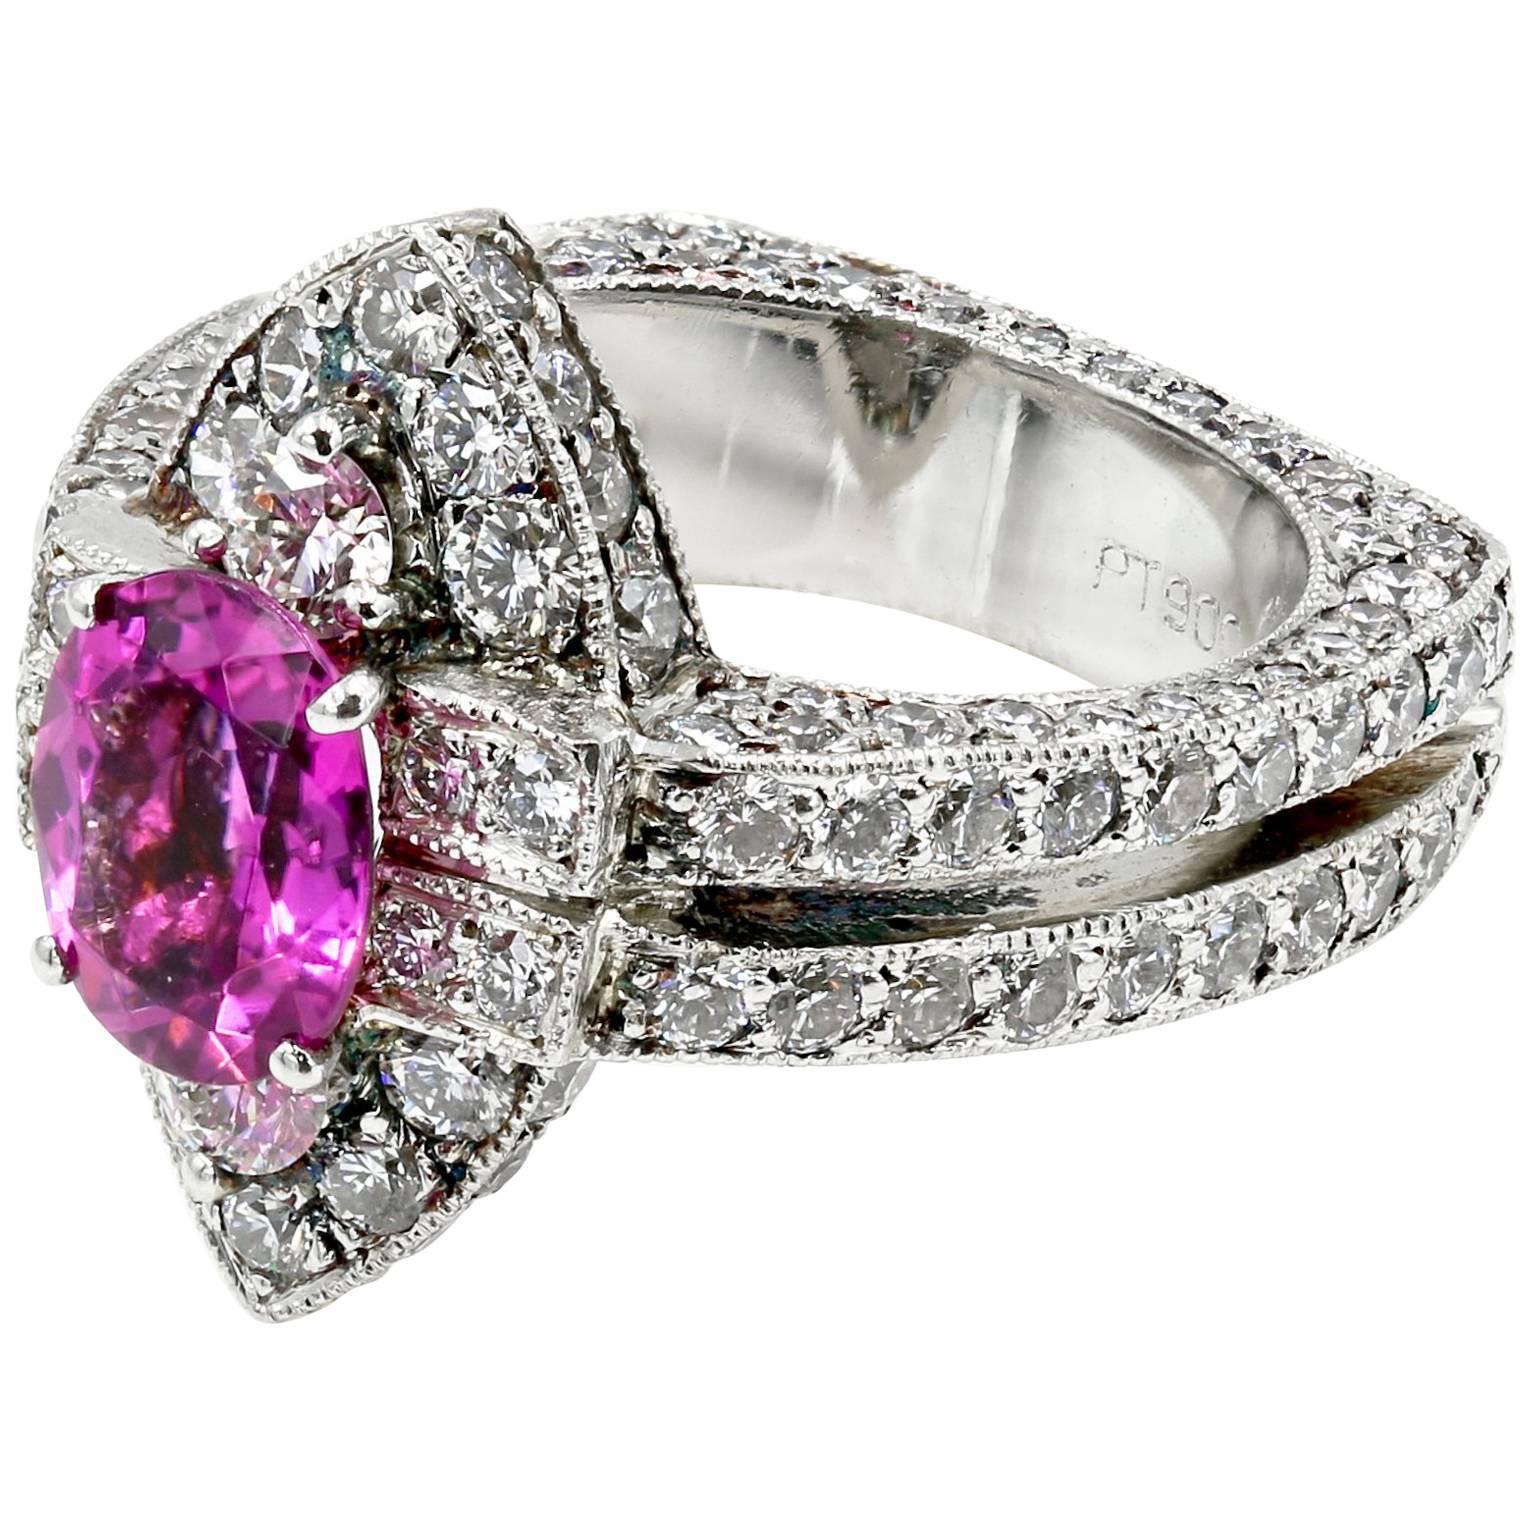 One-of-a-Kind 2.65 Carat Natural Pink Spinel and Diamond Ring